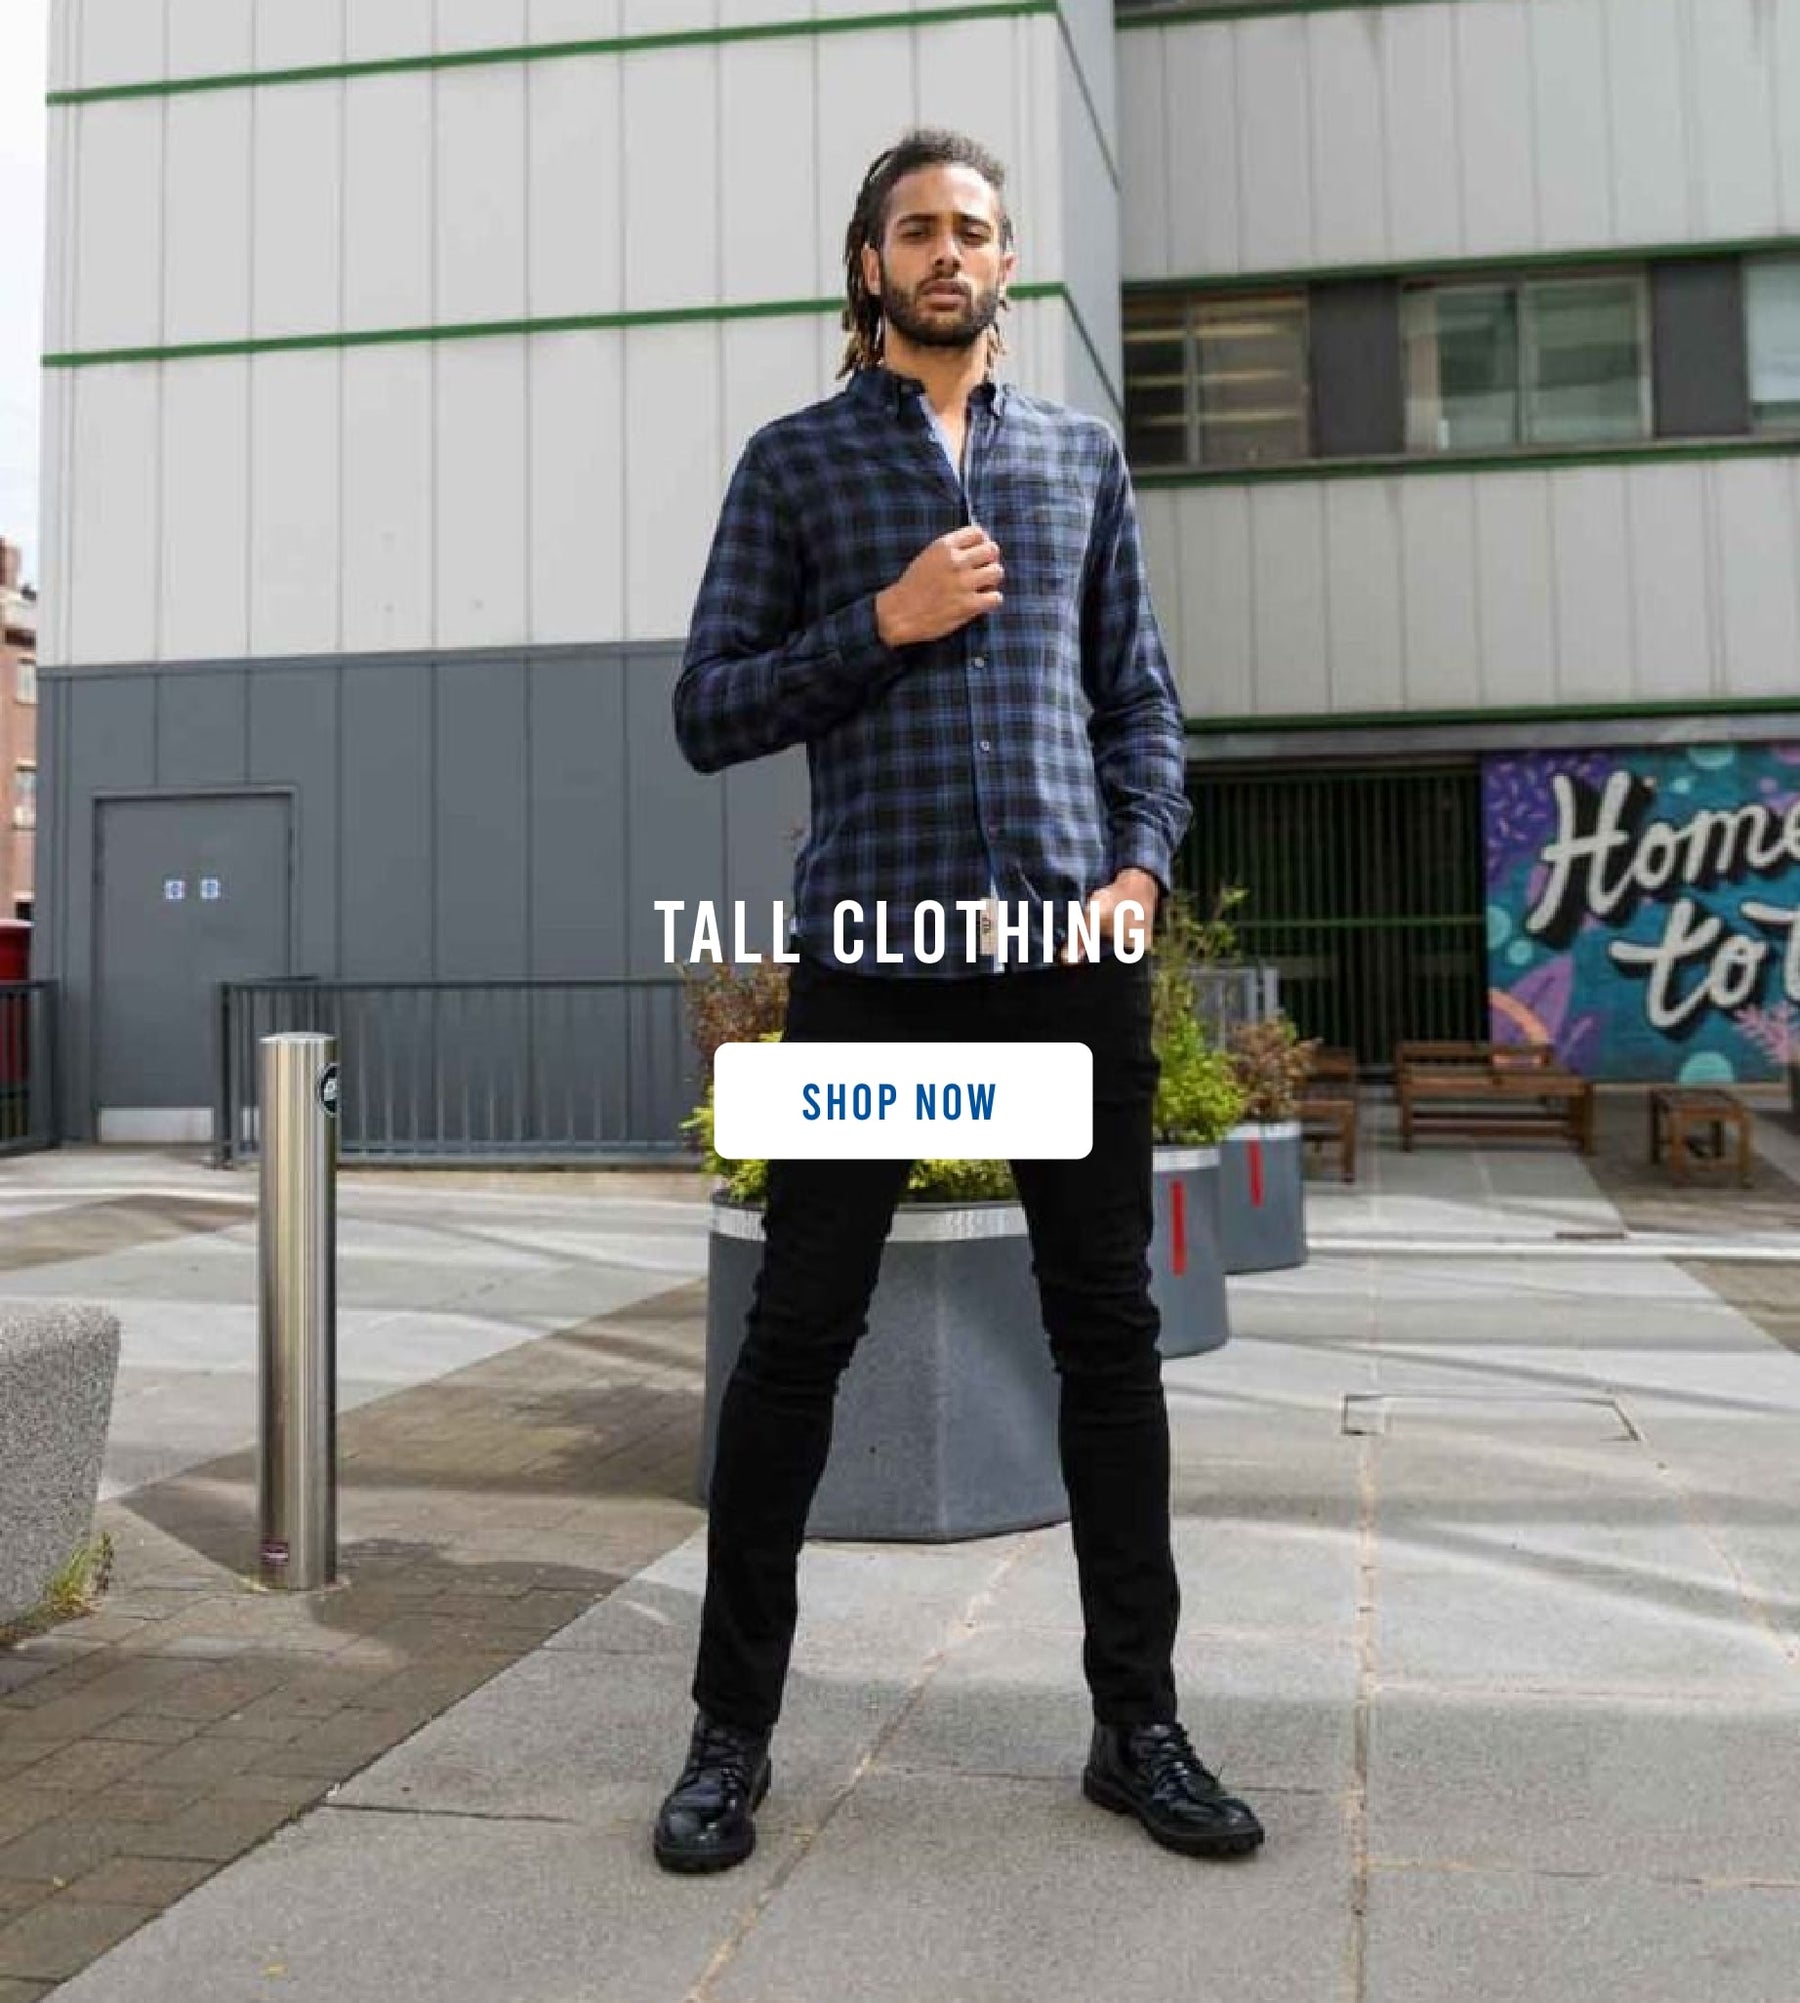 About Us - Big and Tall London's Menswear - Big and Tall London's